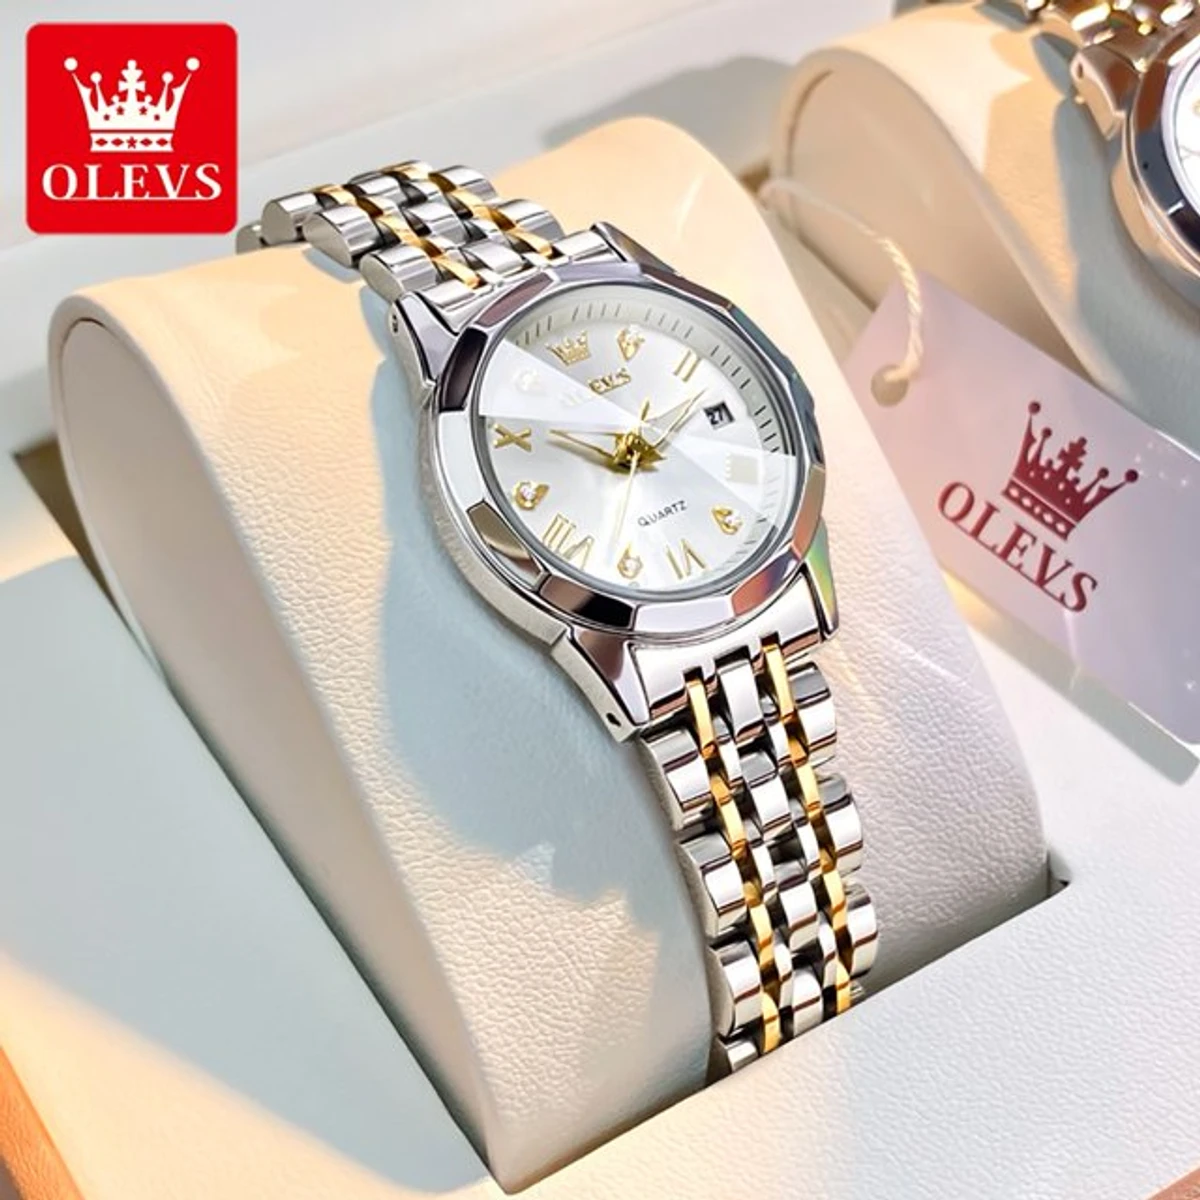 OLEVS MODEL 9931 Watch for Men Stainless Steel Watches - 9941 TOTON AR DIAL WHITE WOMEN